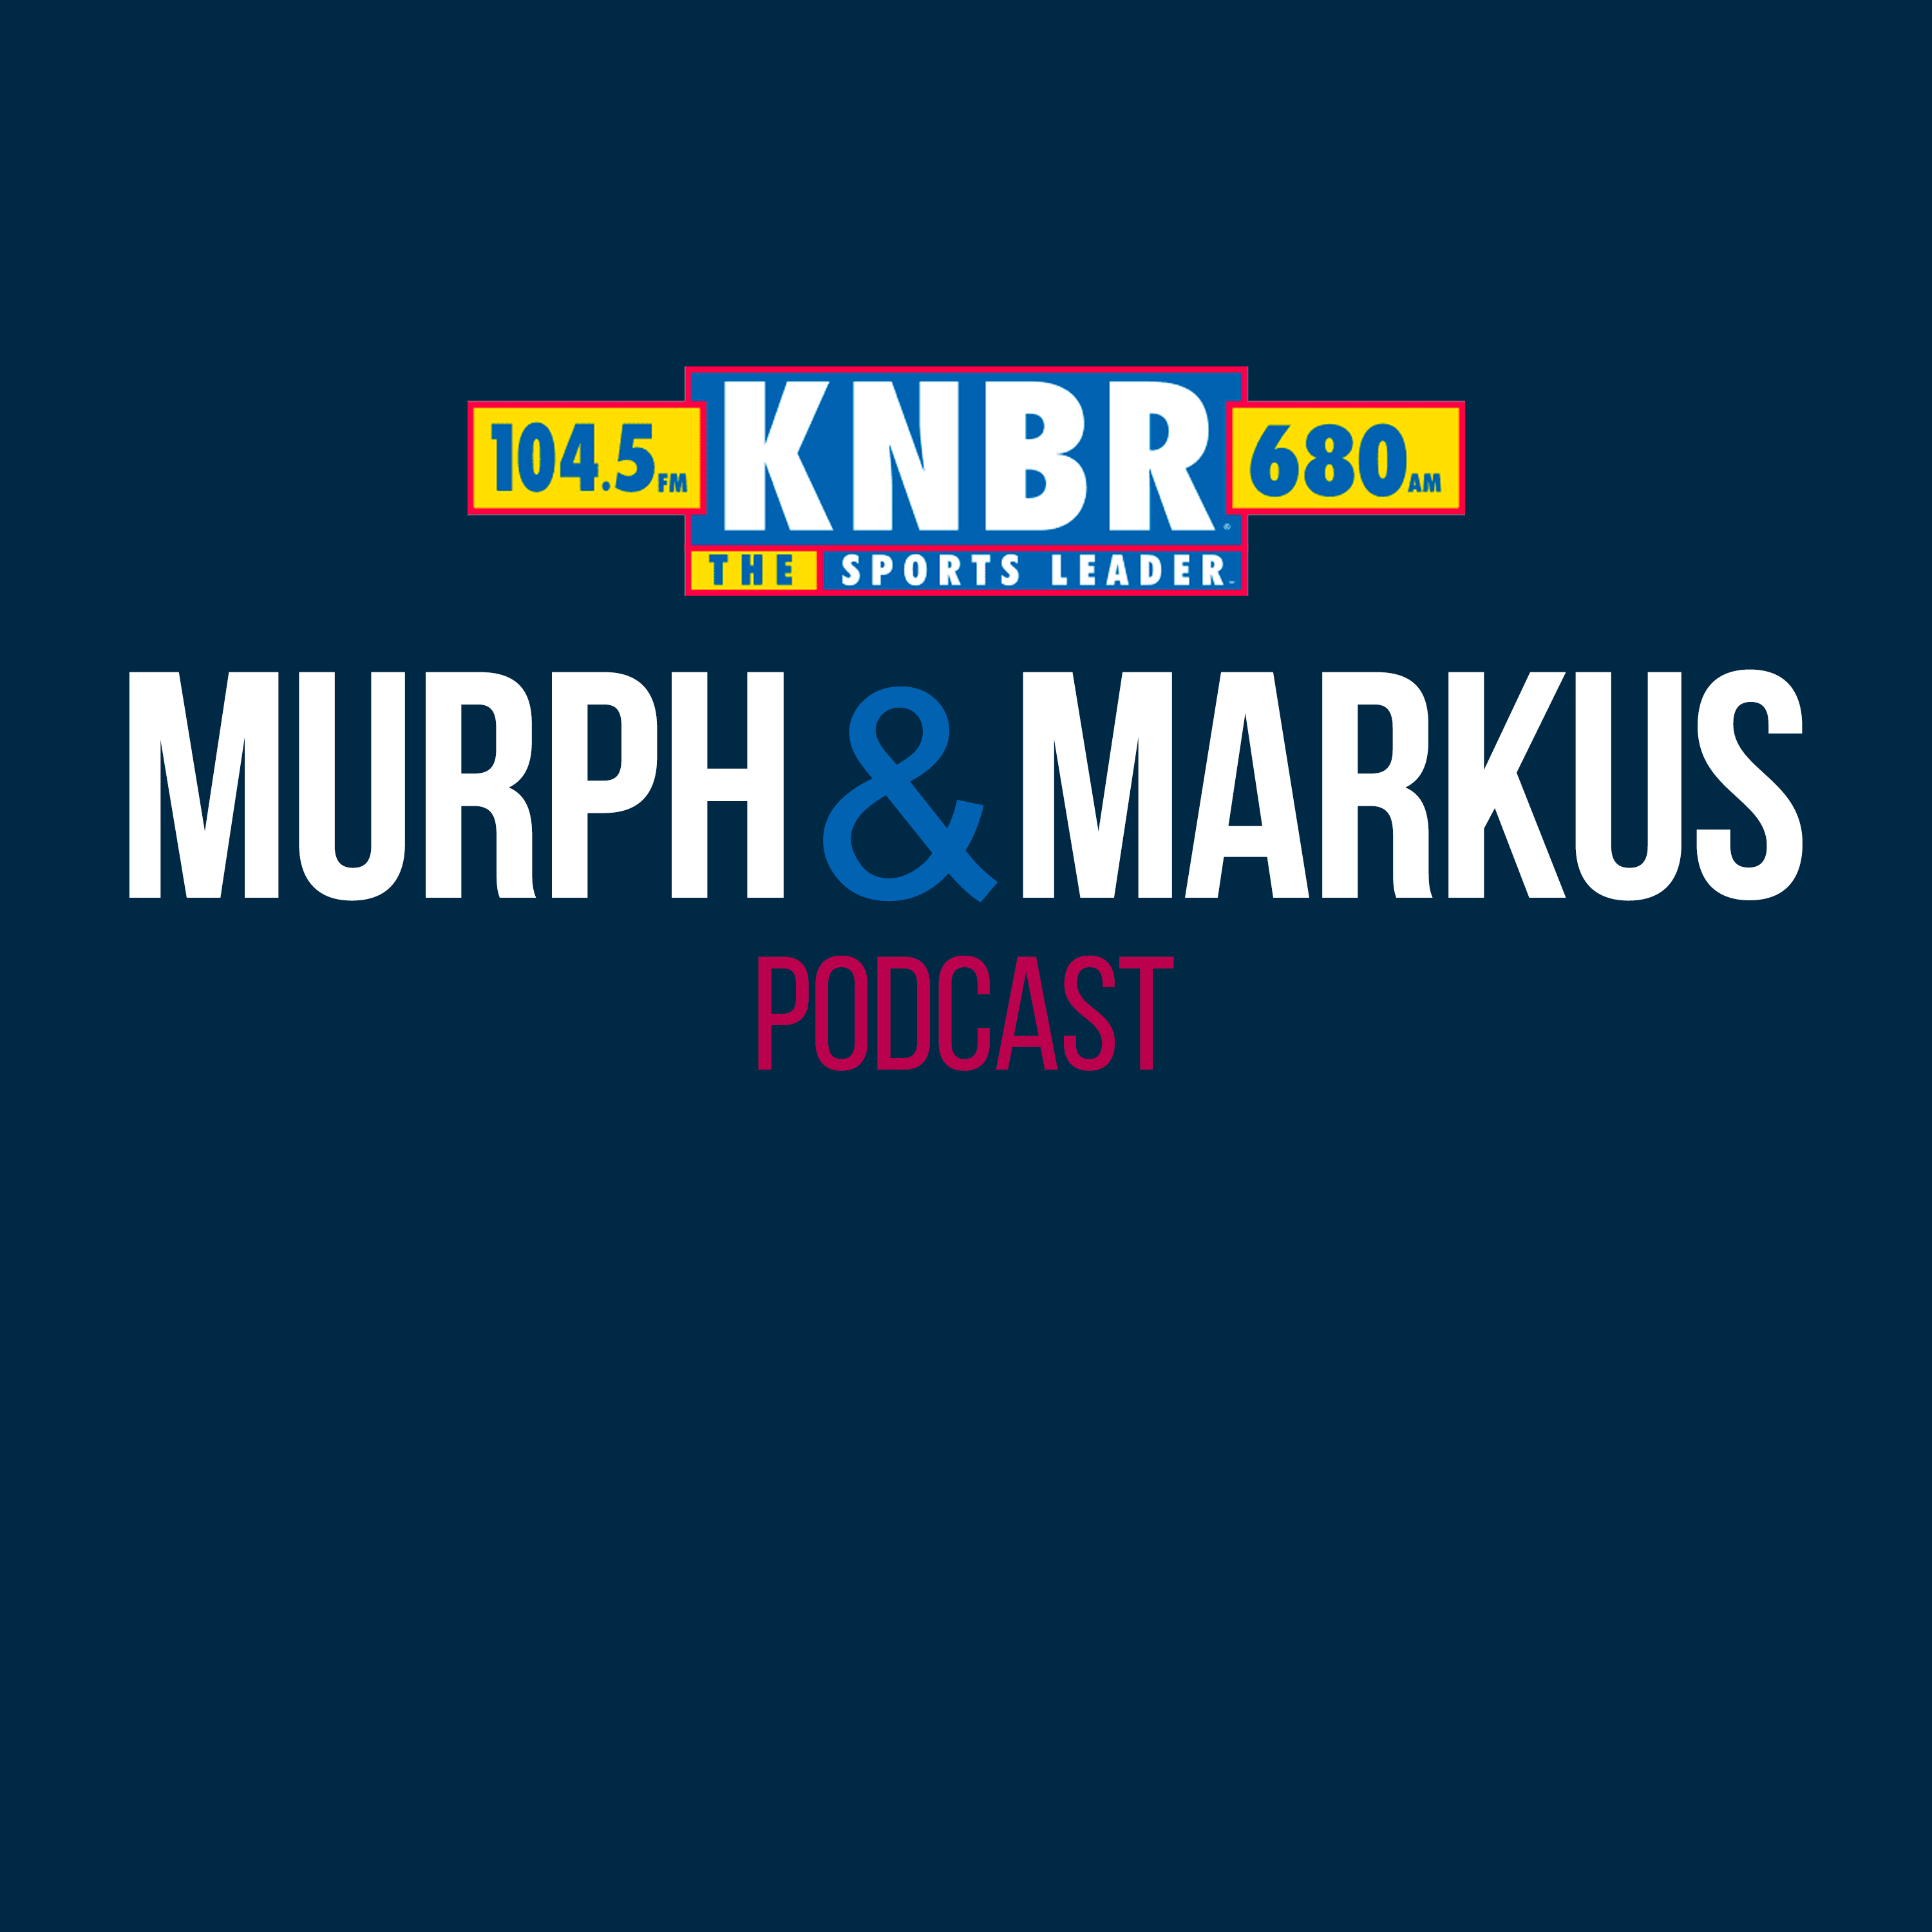 8-2 Hour 1: Murph & Markus recap the latest news regarding Brandon Aiyuk's contract negotiations and discuss the magnitude of Trent Williams holding out as he awaits a new contract